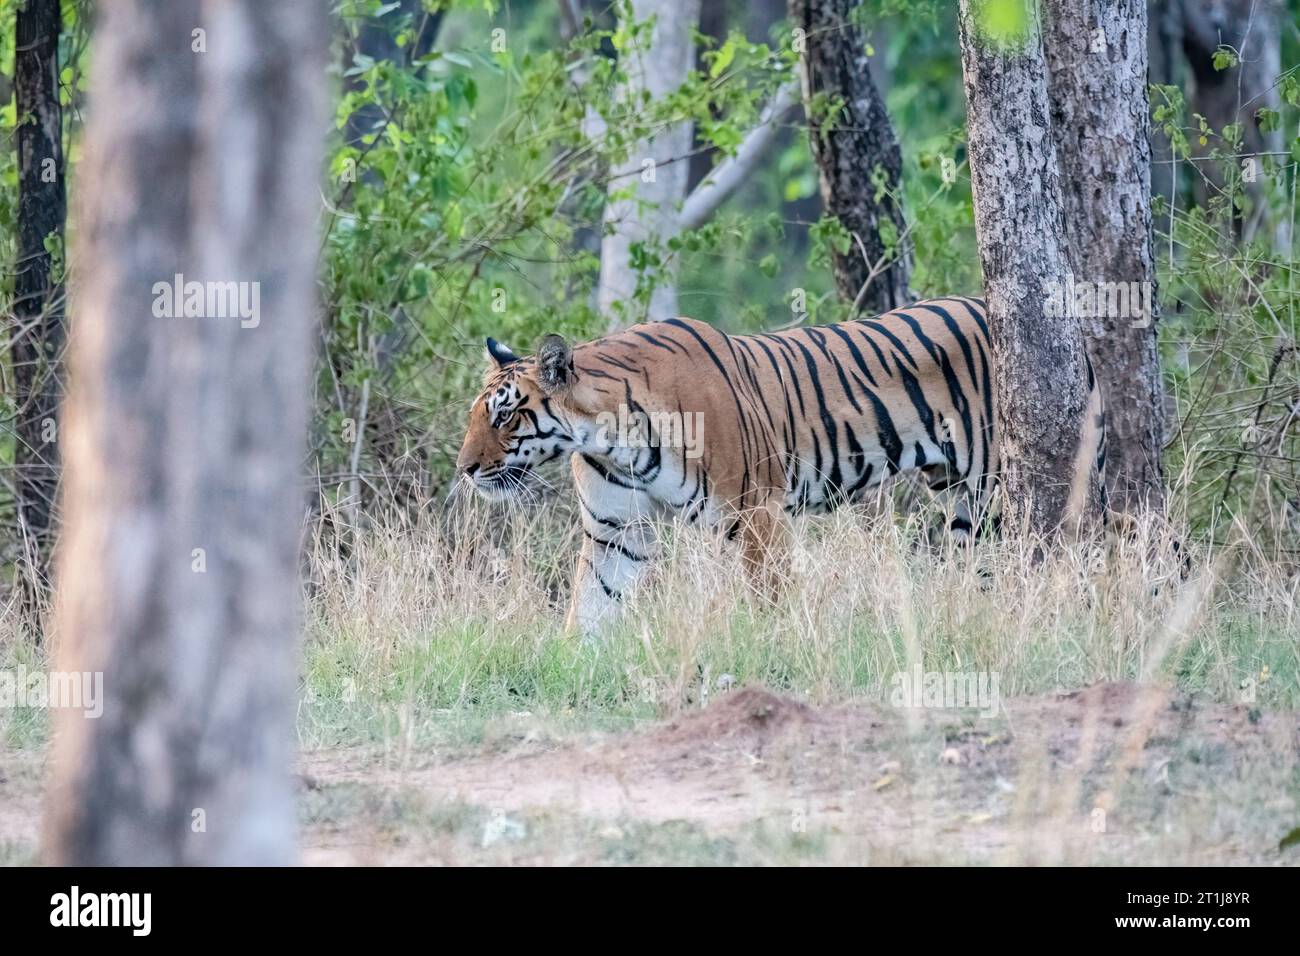 A dominant tigress exploring its territory by crossing the safari track on a hot summer afternoon inside the jungles of Pench National Park Stock Photo